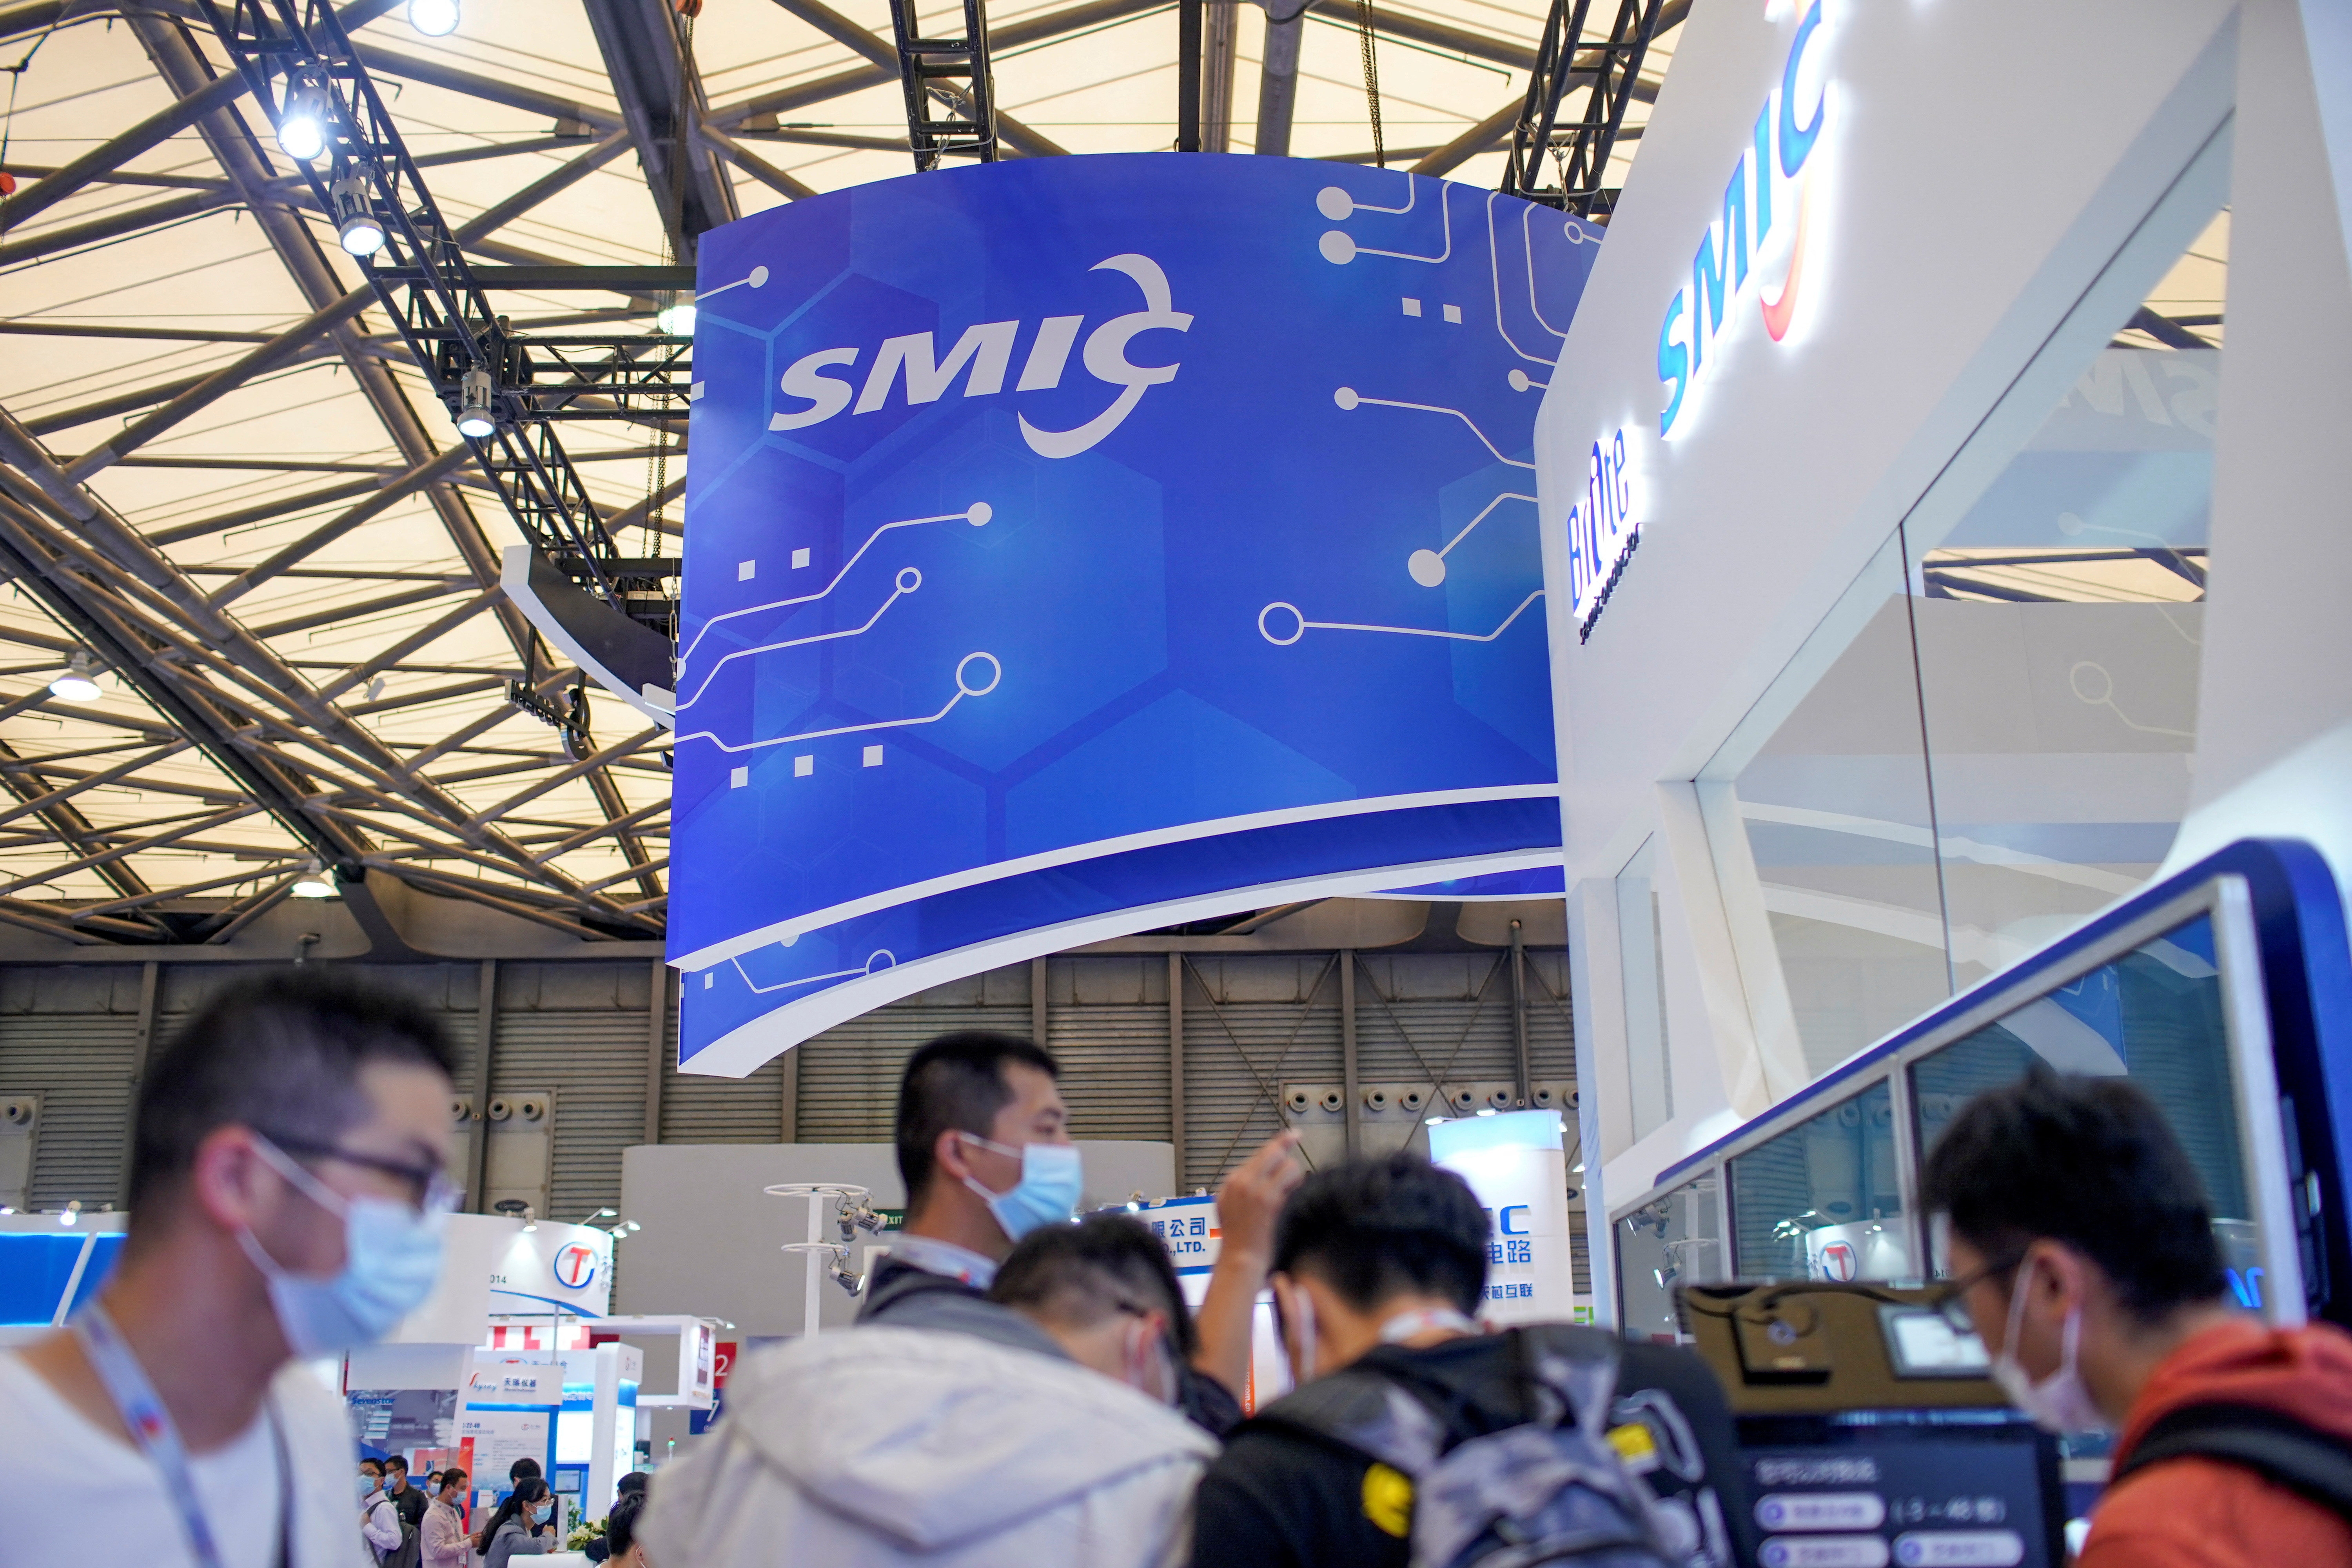 People visit a booth of Semiconductor Manufacturing International Corporation (SMIC), at China International Semiconductor Expo (IC China 2020) following the coronavirus disease (COVID-19) outbreak in Shanghai